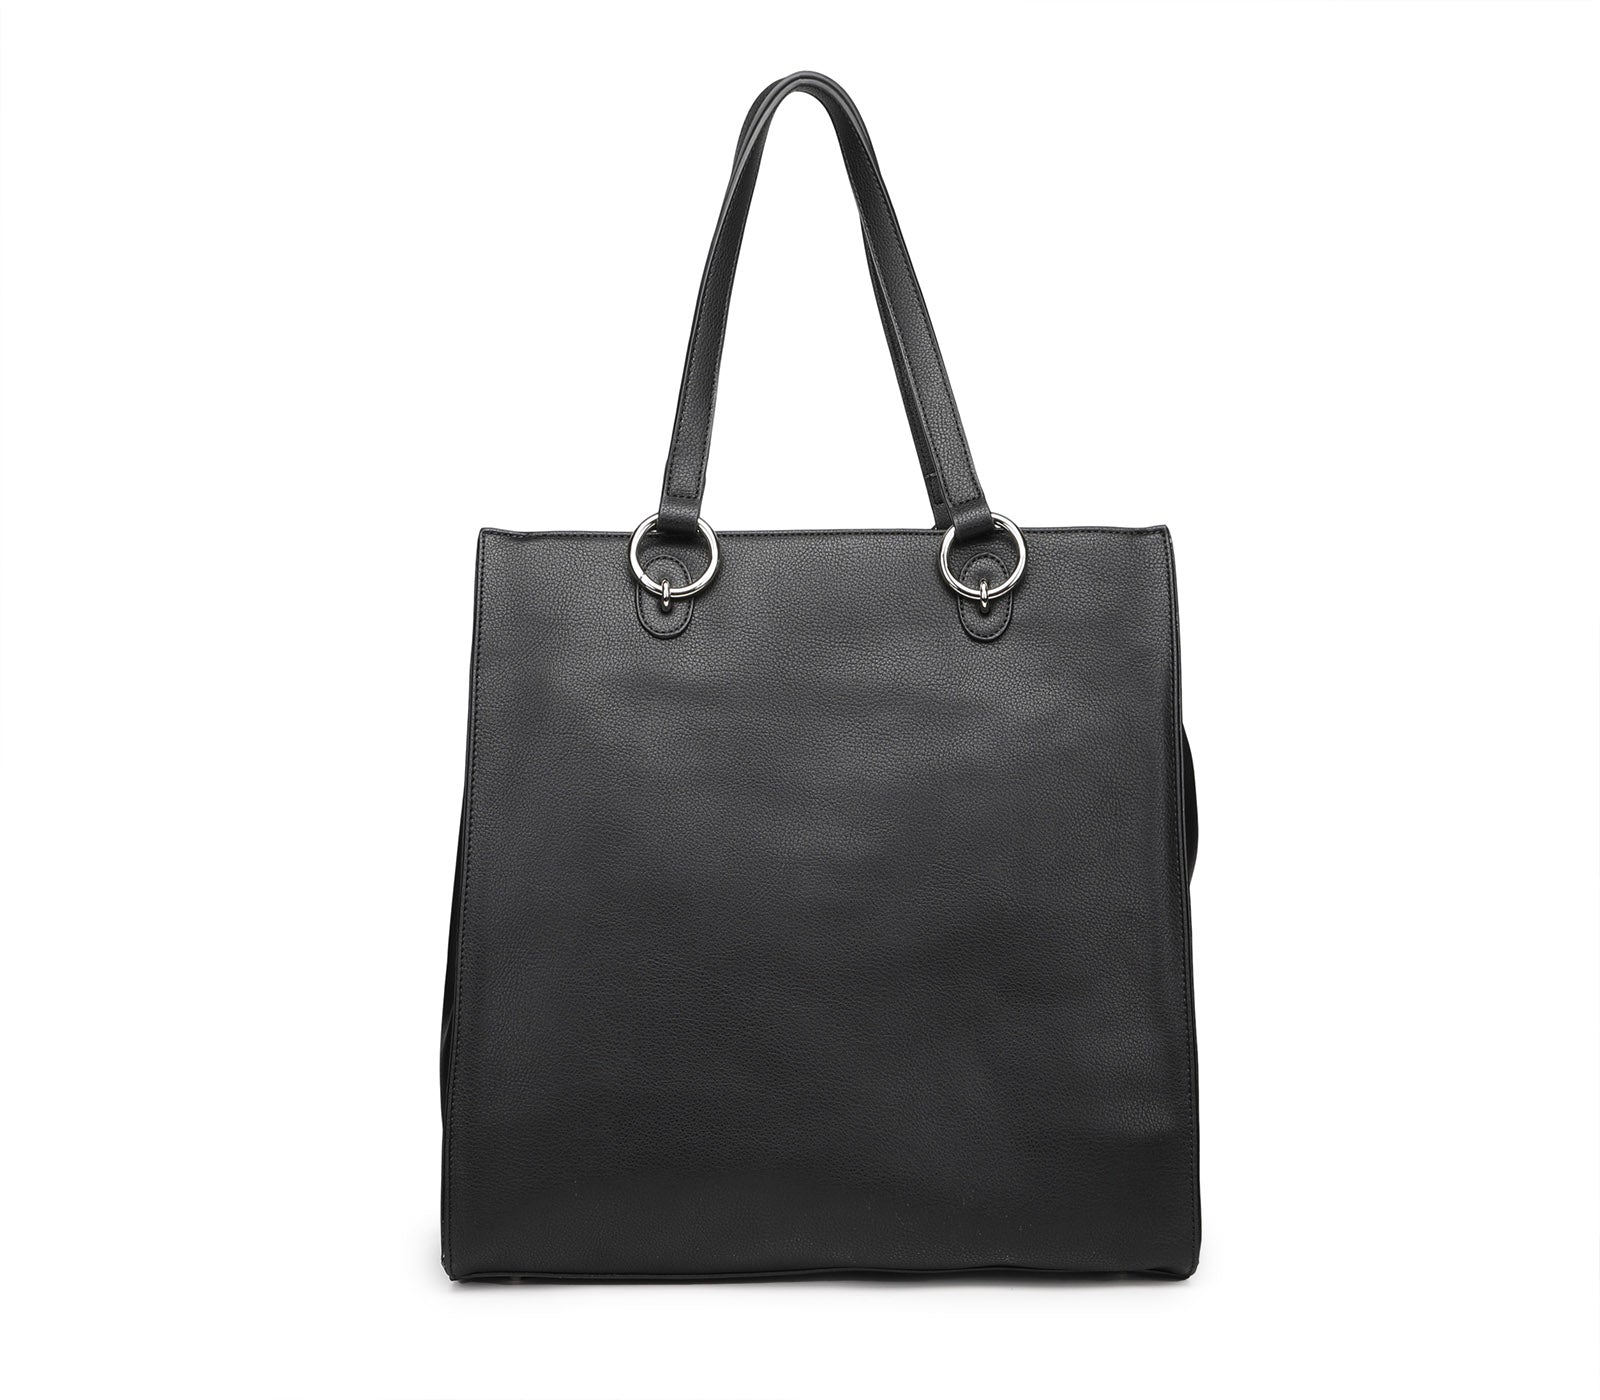 Black Straight-Line Shopper with Small Outer Clutch Bag